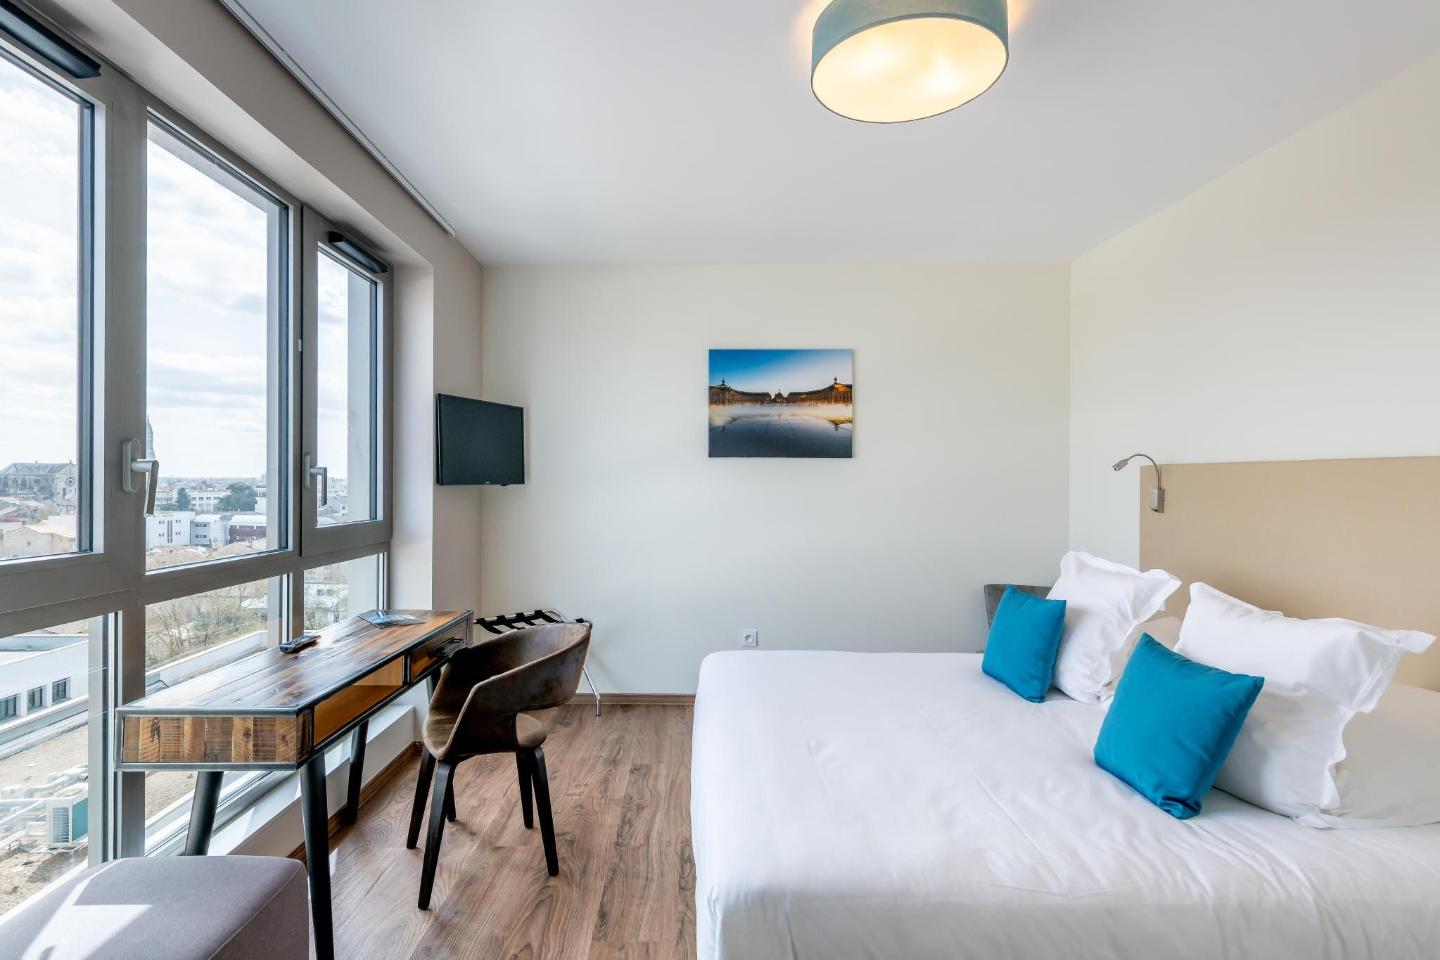 The 10 best serviced apartments in Bordeaux, France | Booking.com